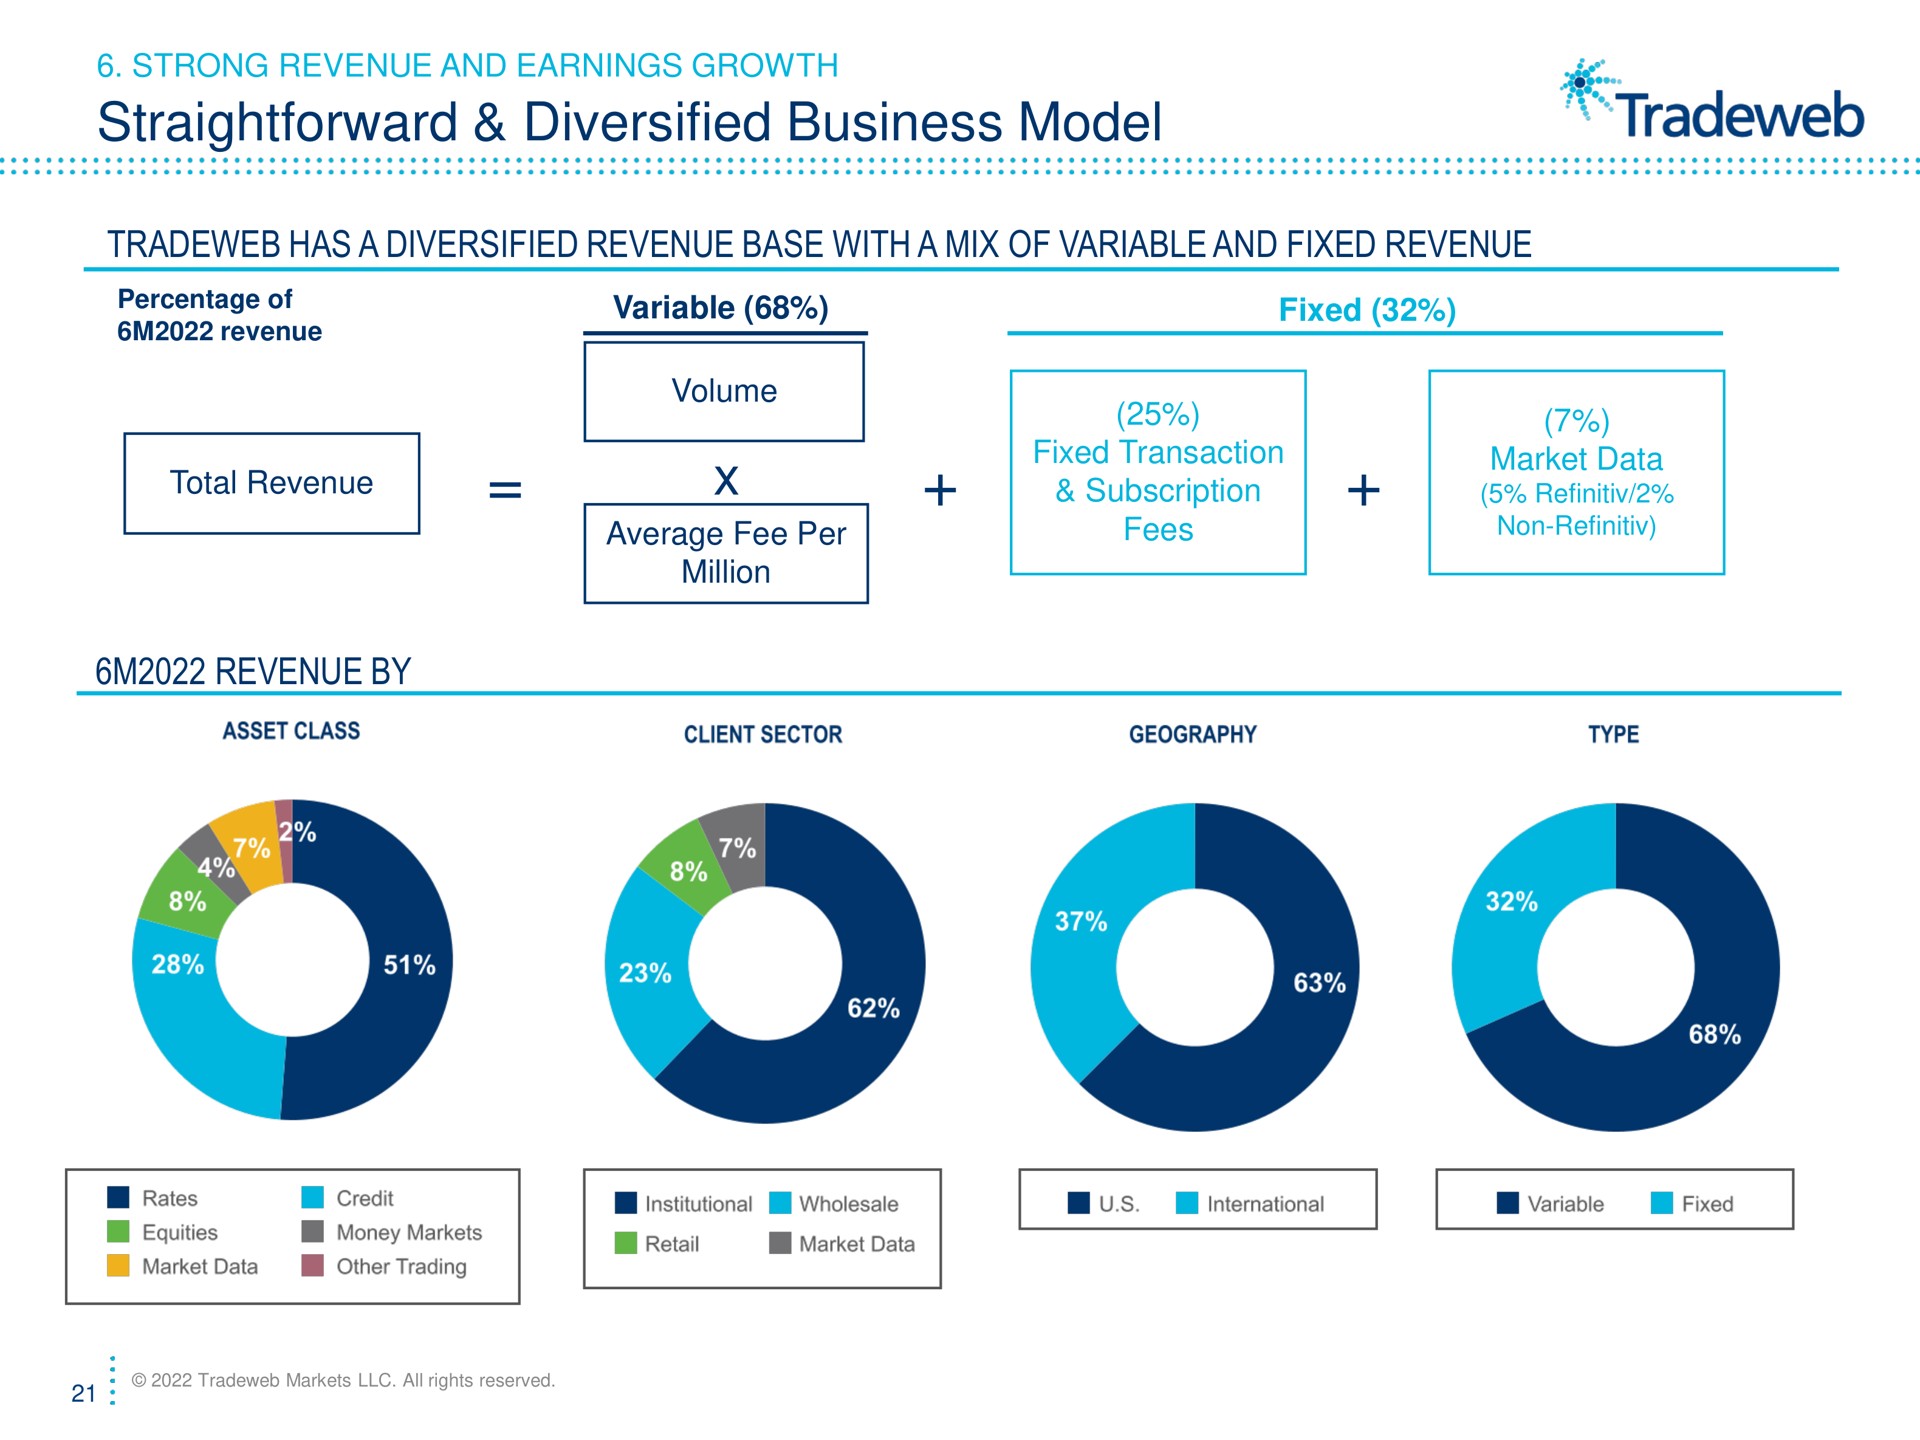 straightforward diversified business model has a diversified revenue base with a mix of variable and fixed revenue revenue by strong earnings growth percentage average fee per million transaction subscription fees market data non | Tradeweb